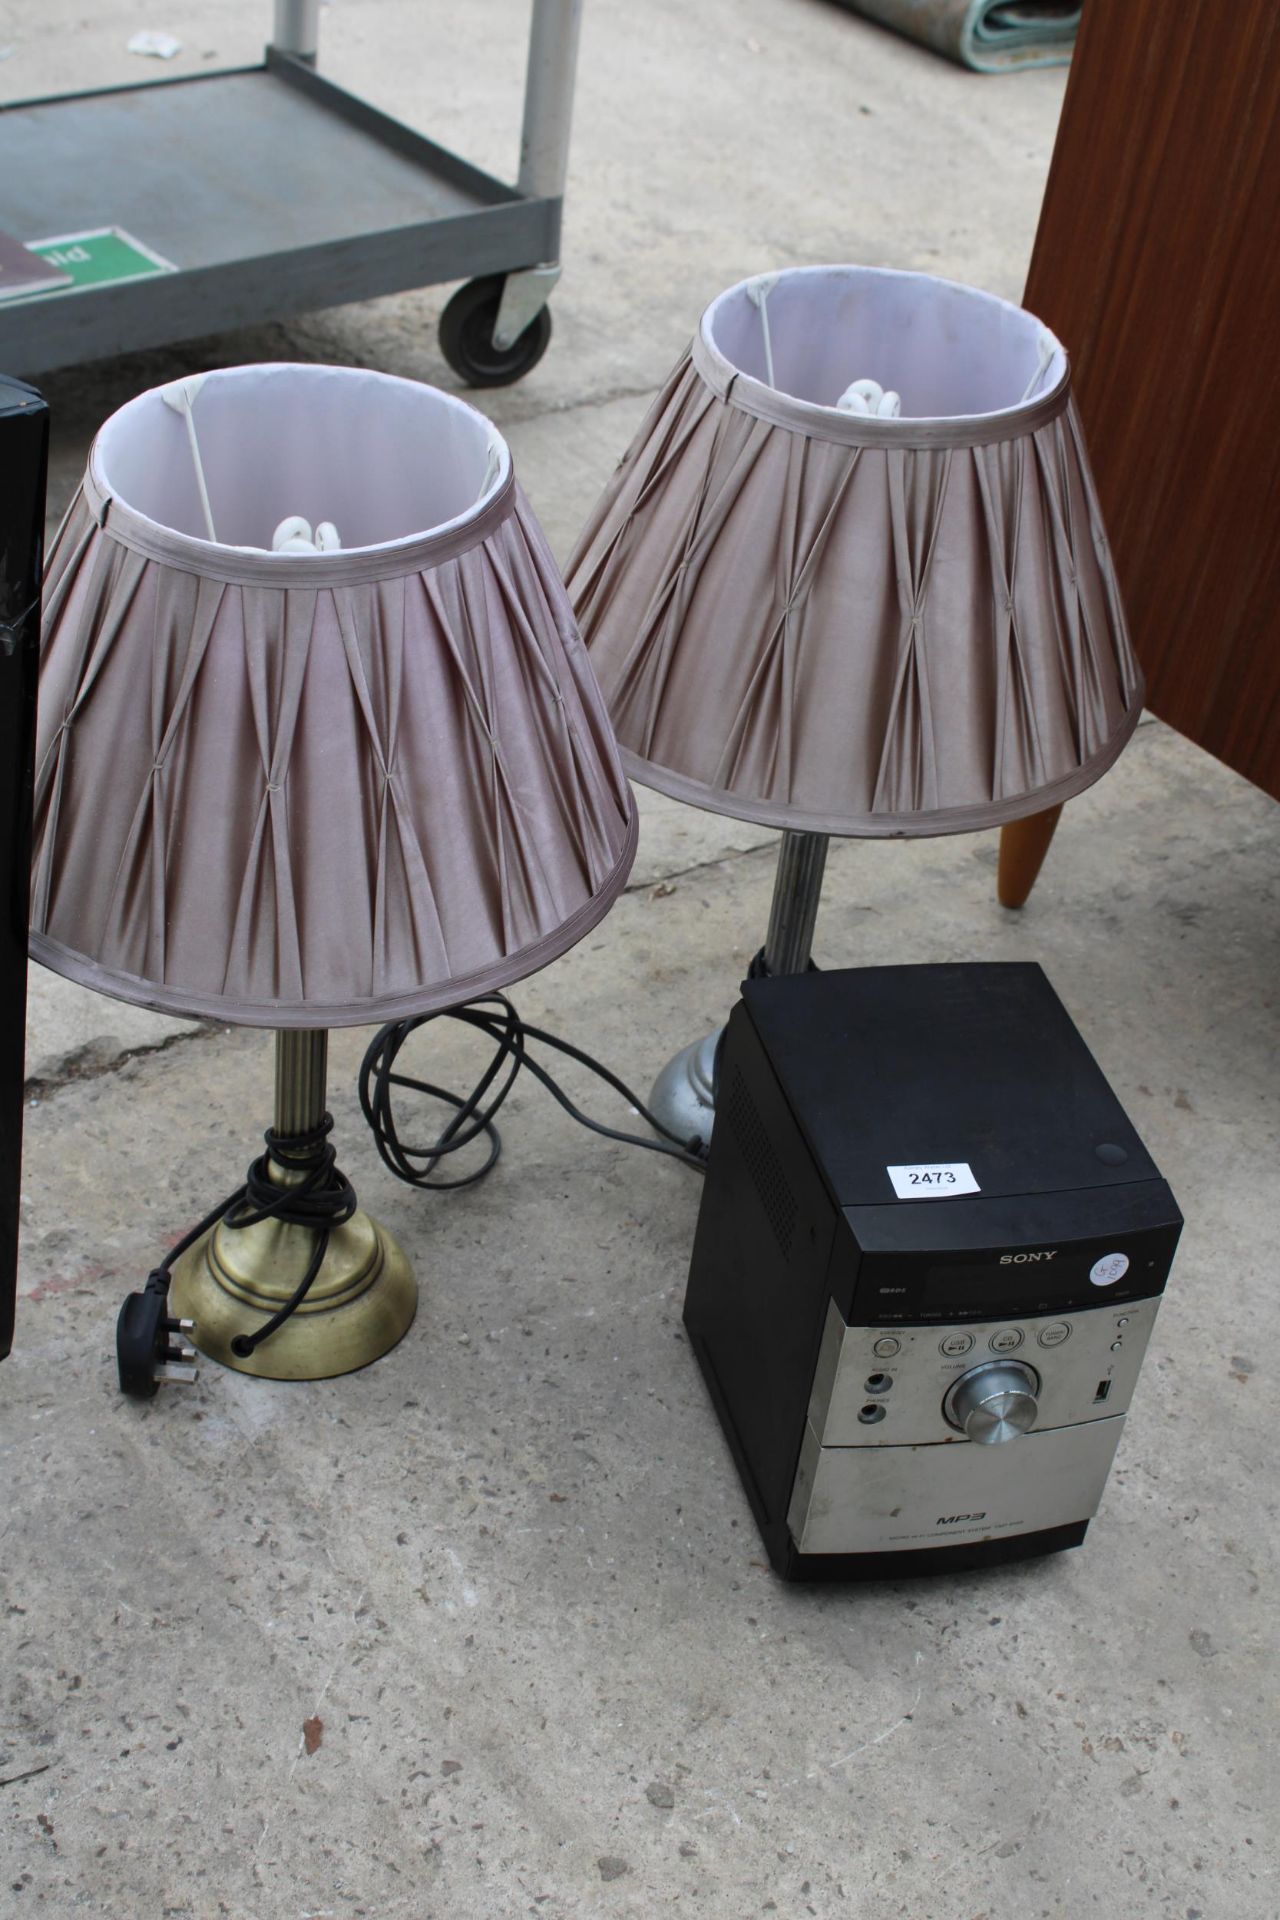 TWO TABLE LAMPS AND A SONY MP3 PLAYER